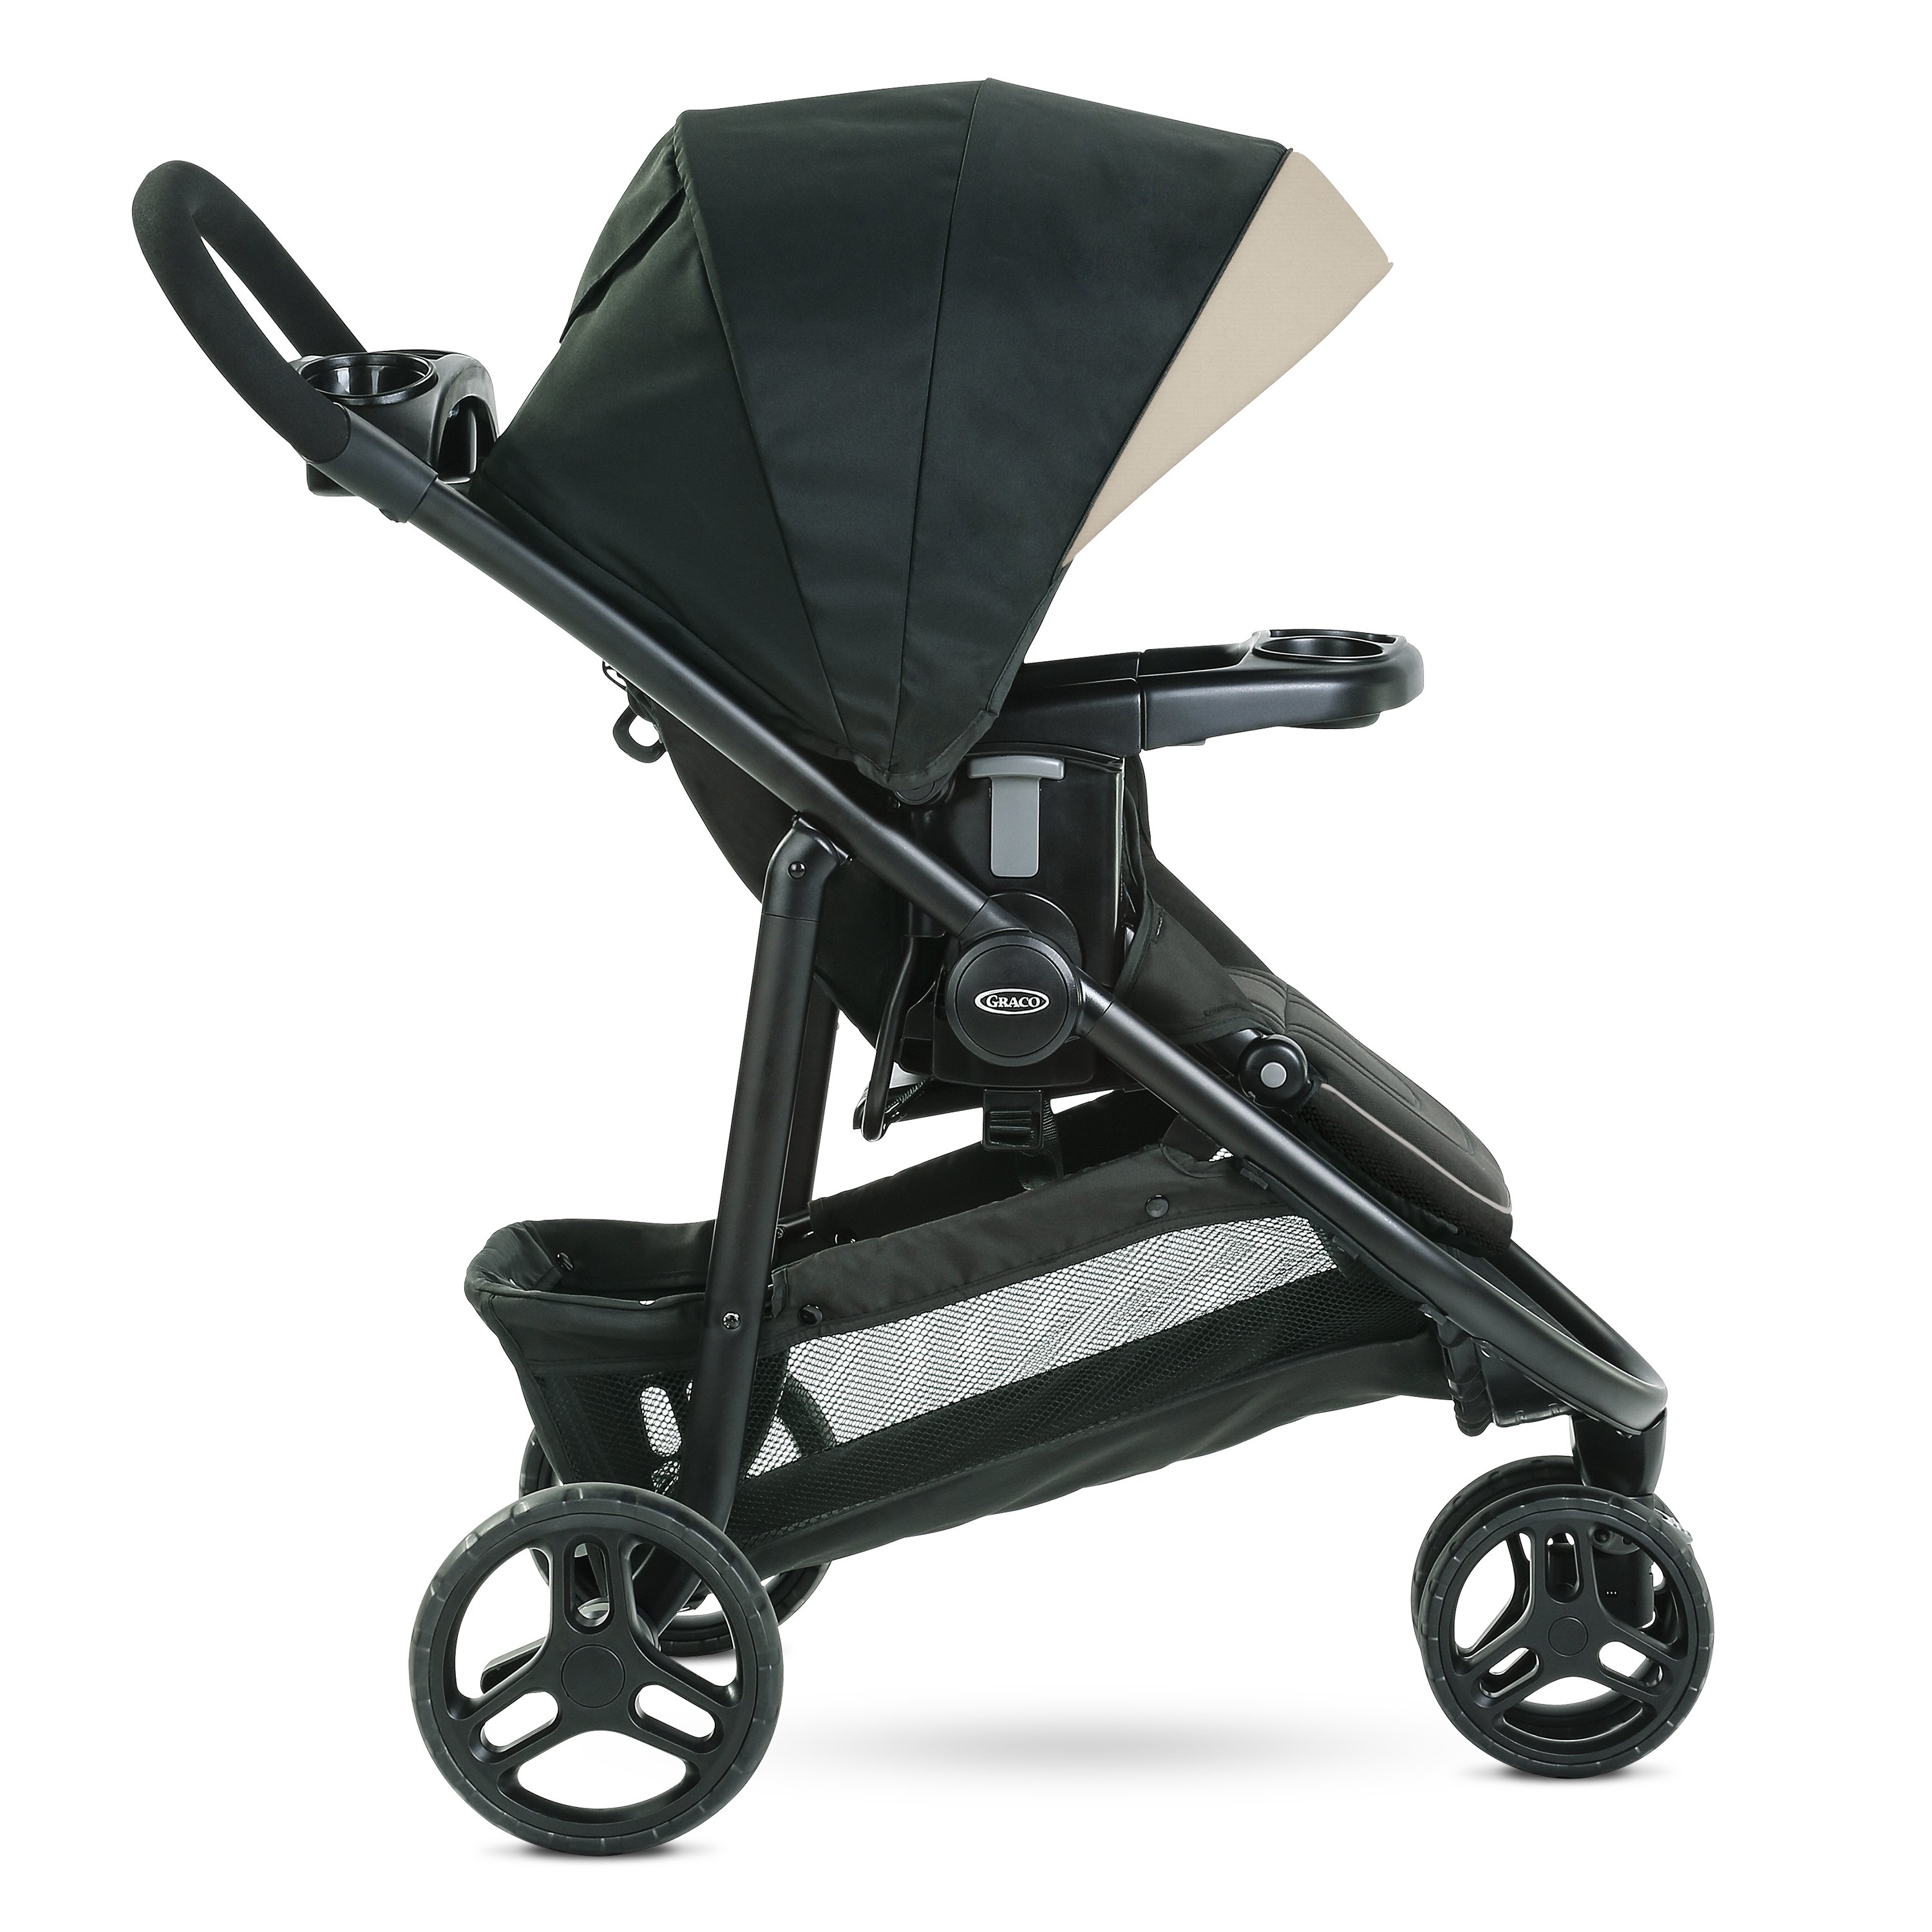 mother's choice grace 4 wheel stroller review